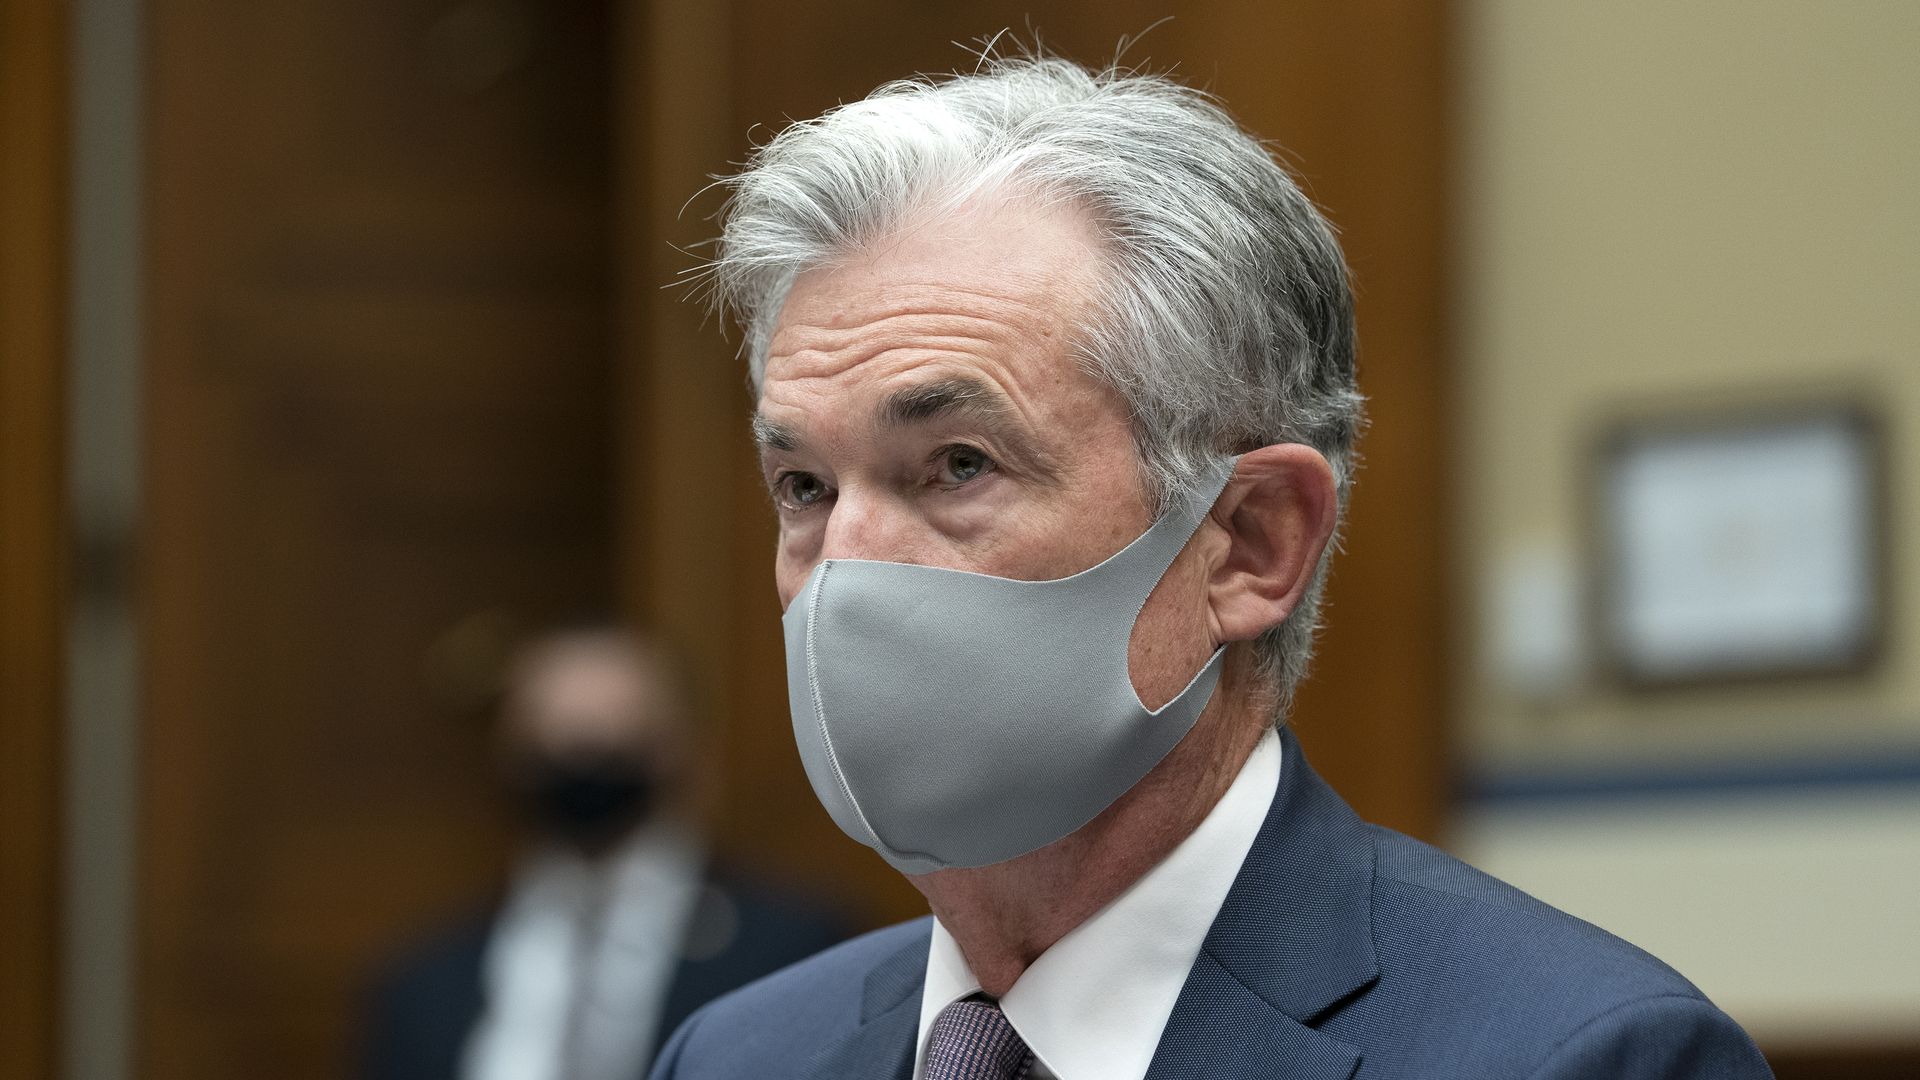 Jerome Powell, chairman of the U.S. Federal Reserve, wears a protective mask during a Congressional hearing